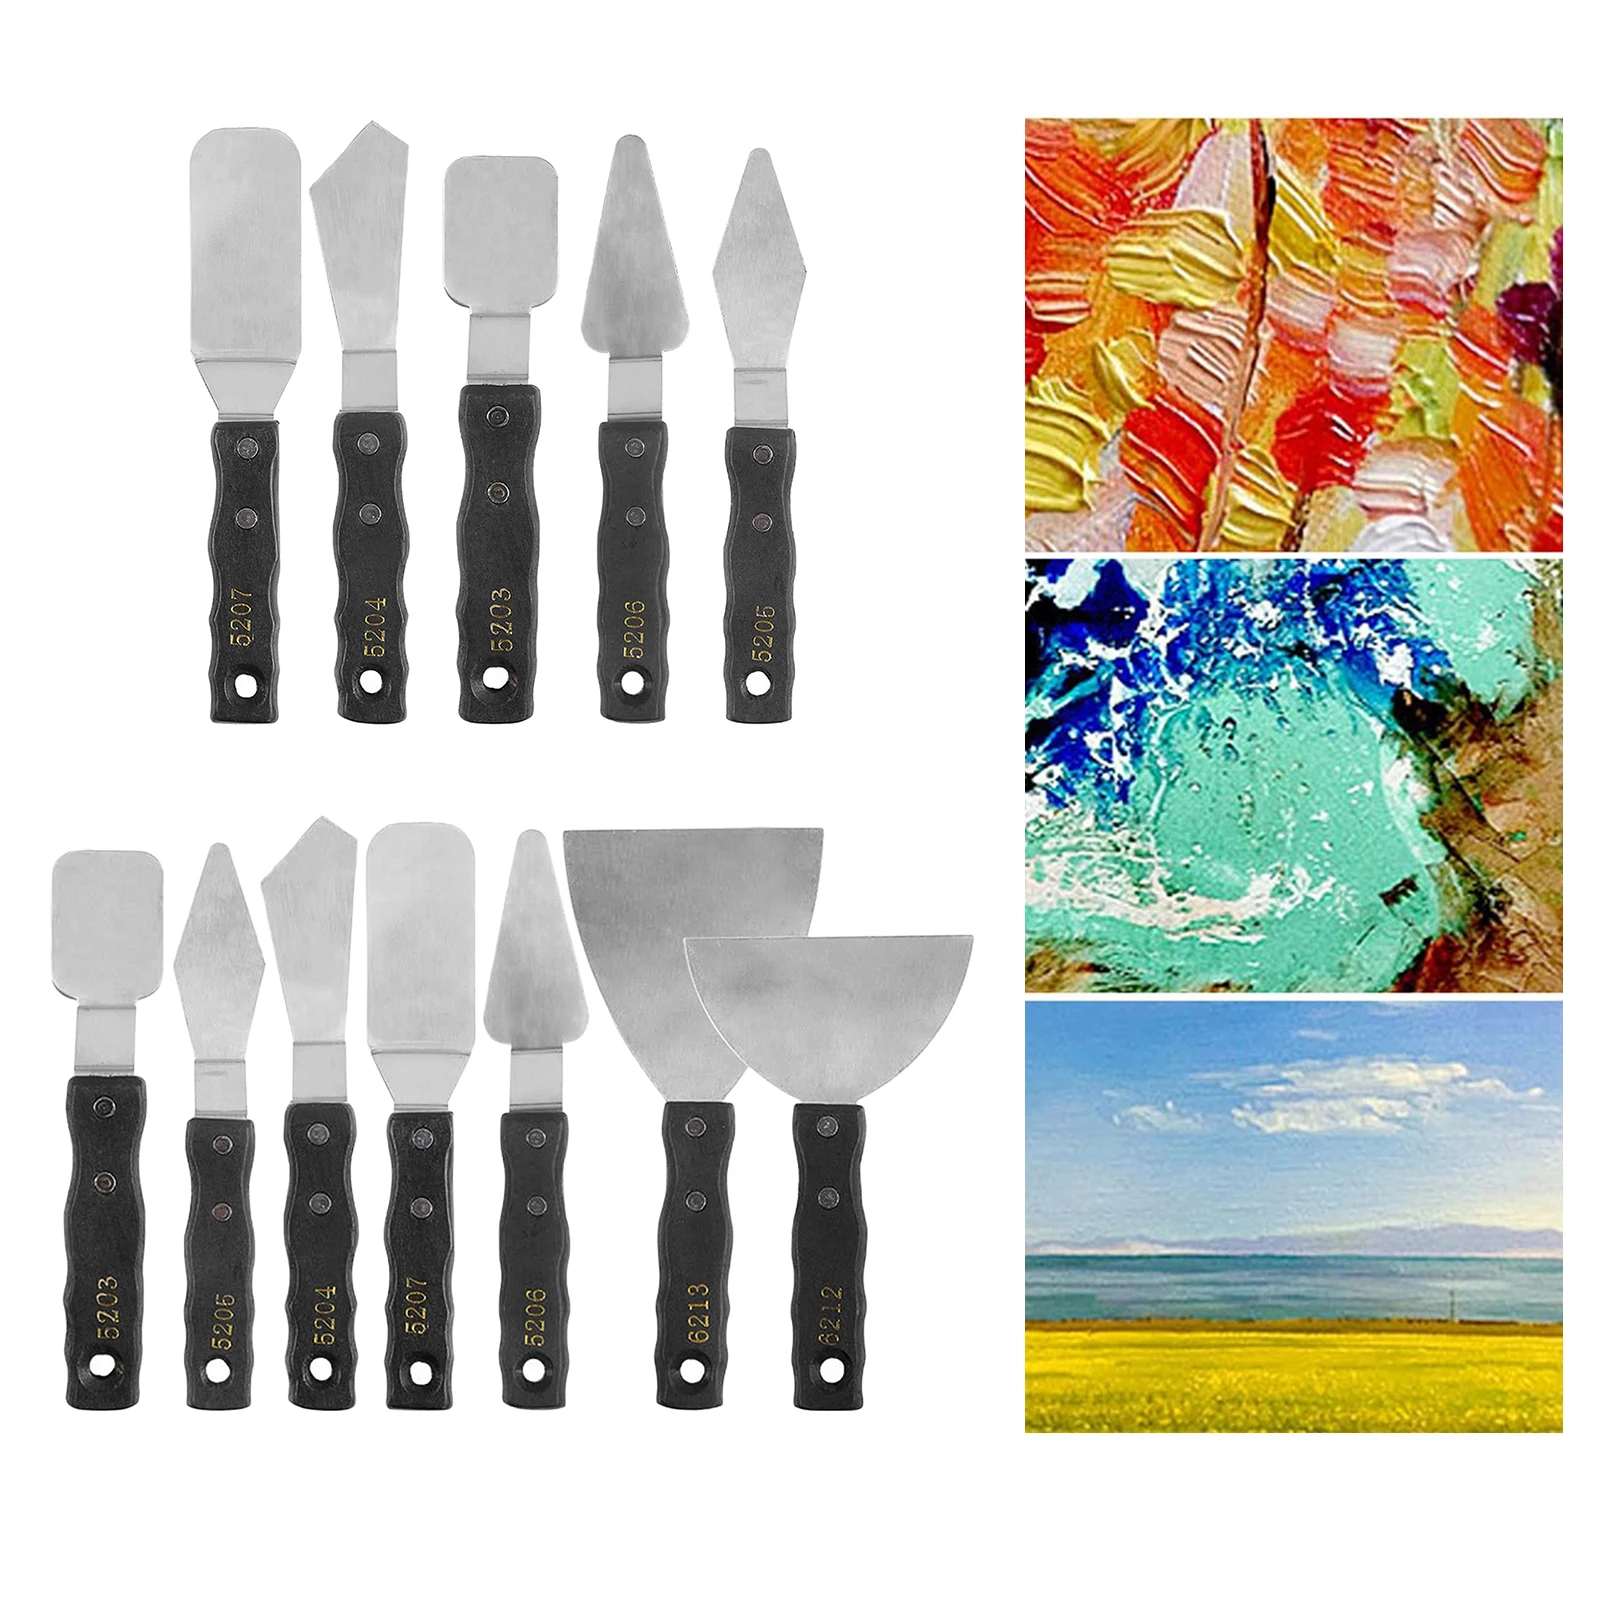 Professional Palette Knife Painting Stainless Steel Spatula Palette Knife Oil Paint Metal Knives Wood Handle (Black)